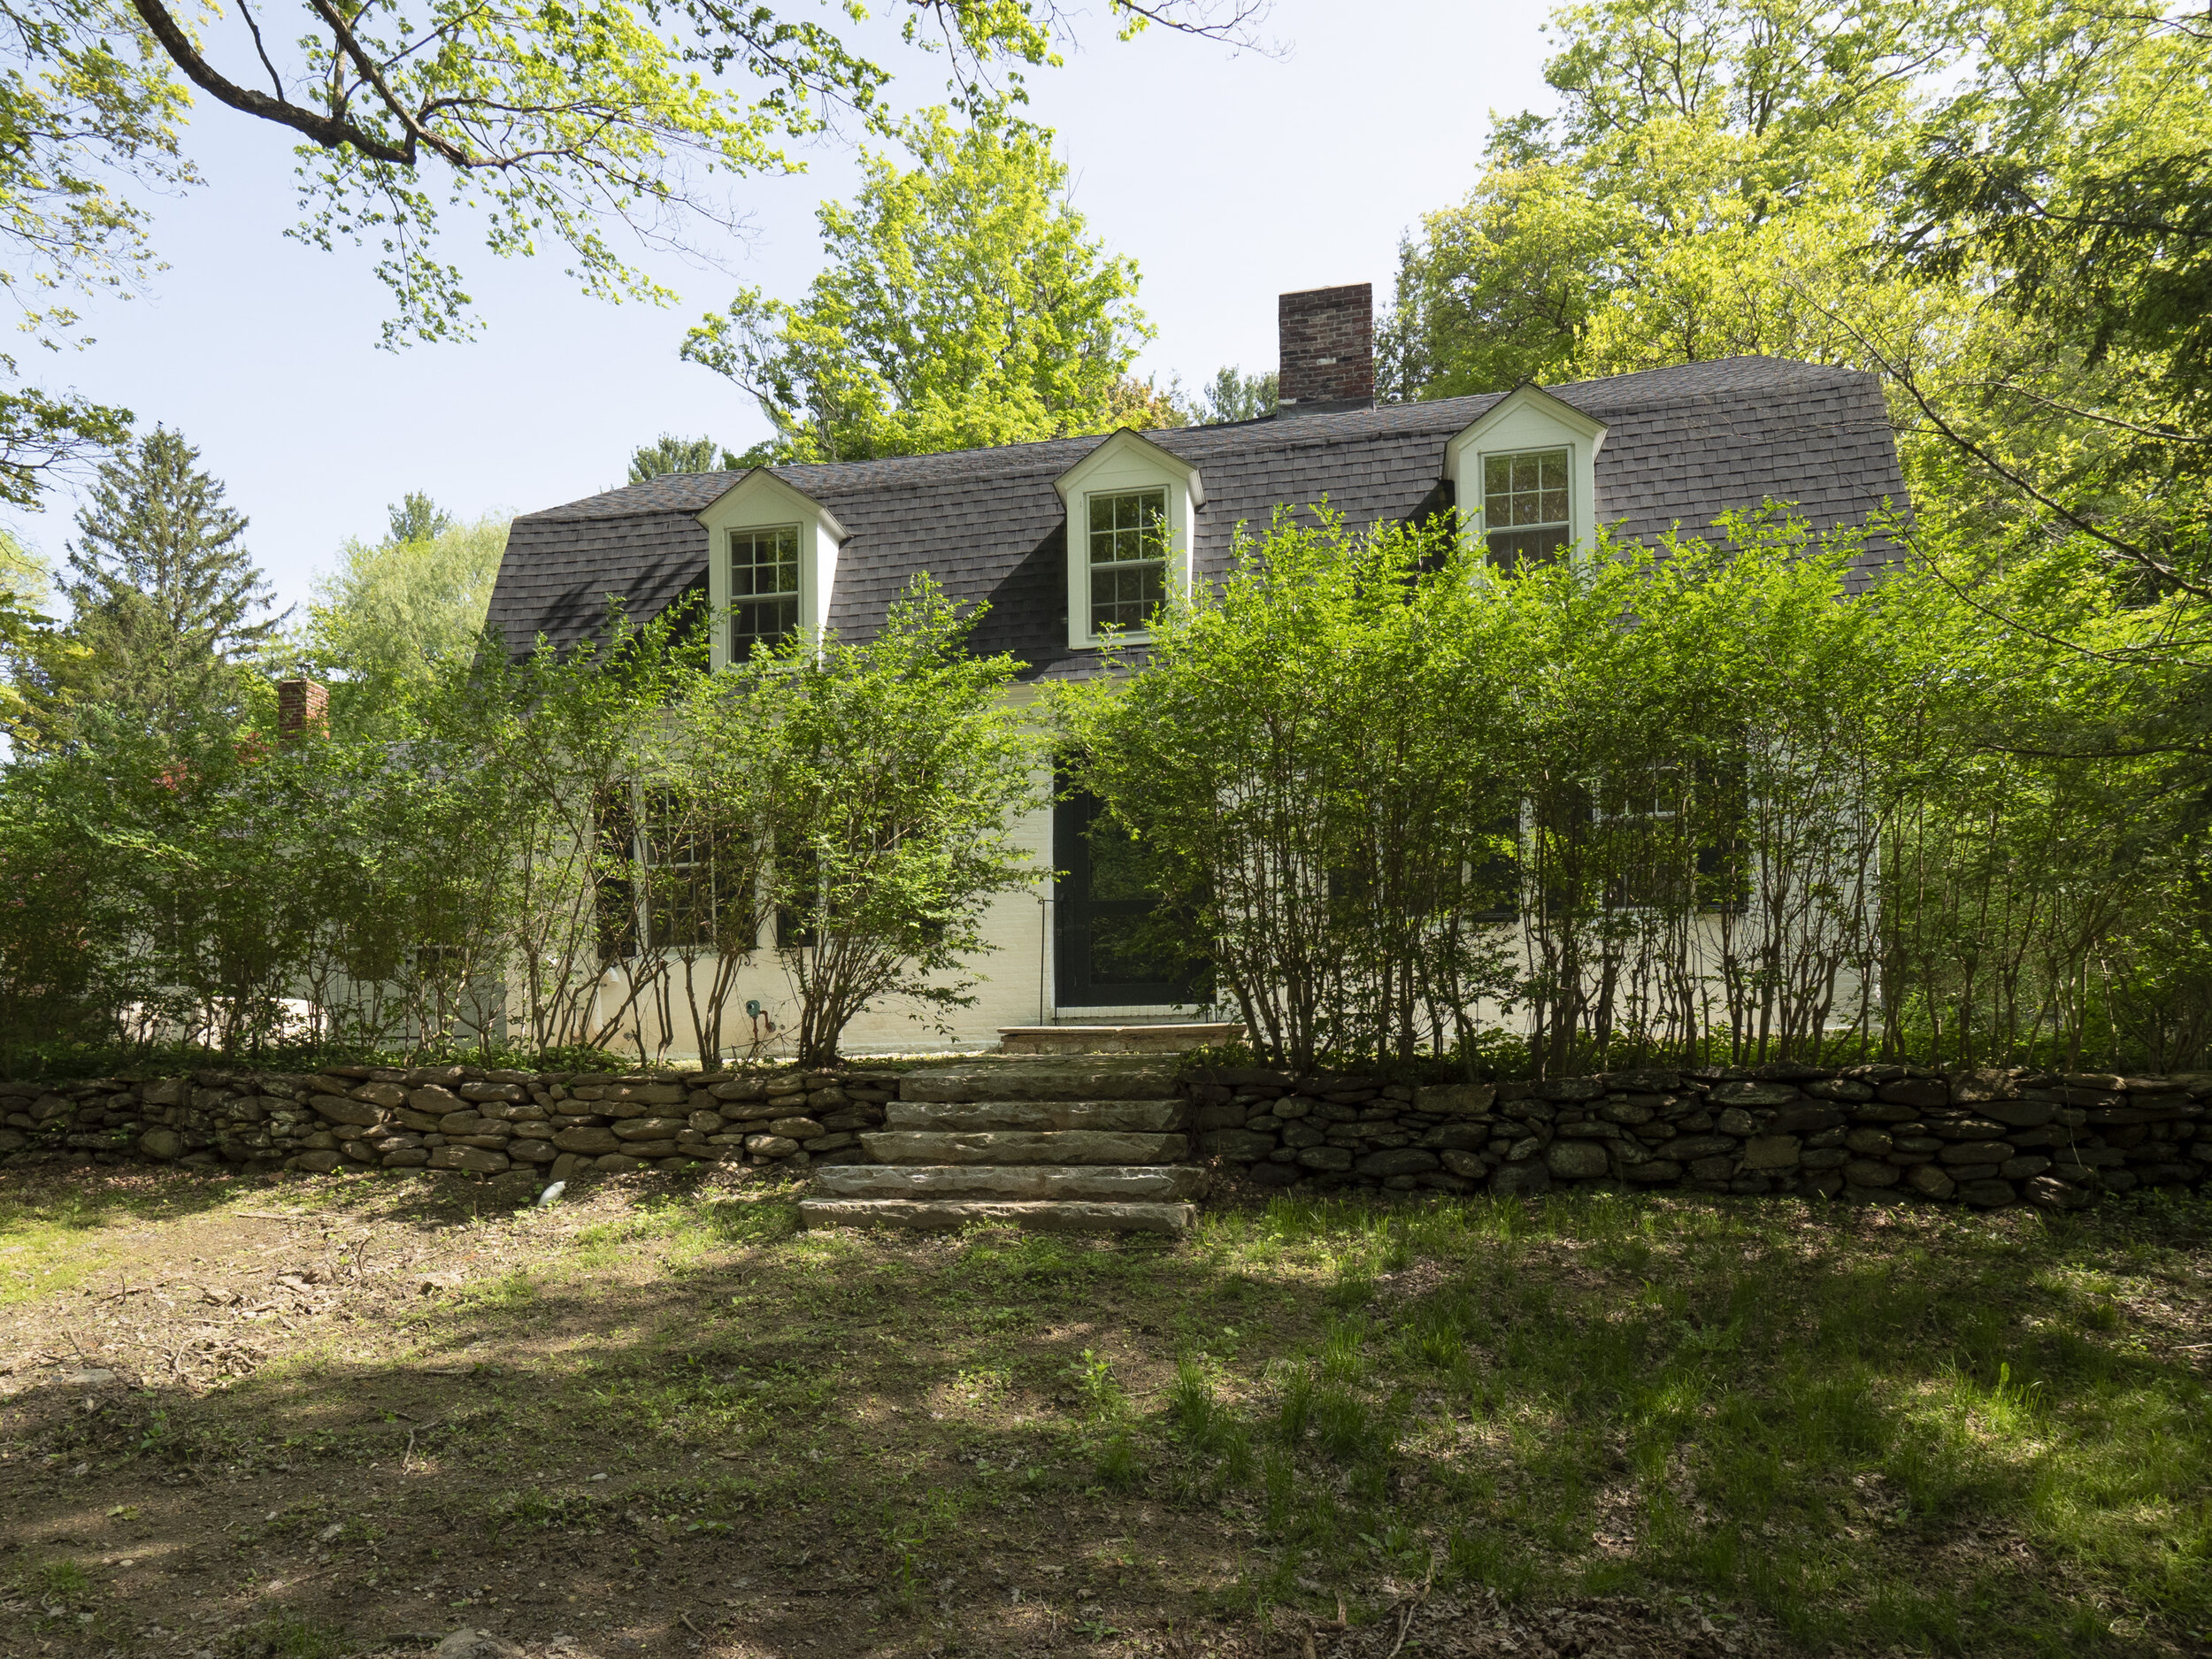 Fitch-Demarest House